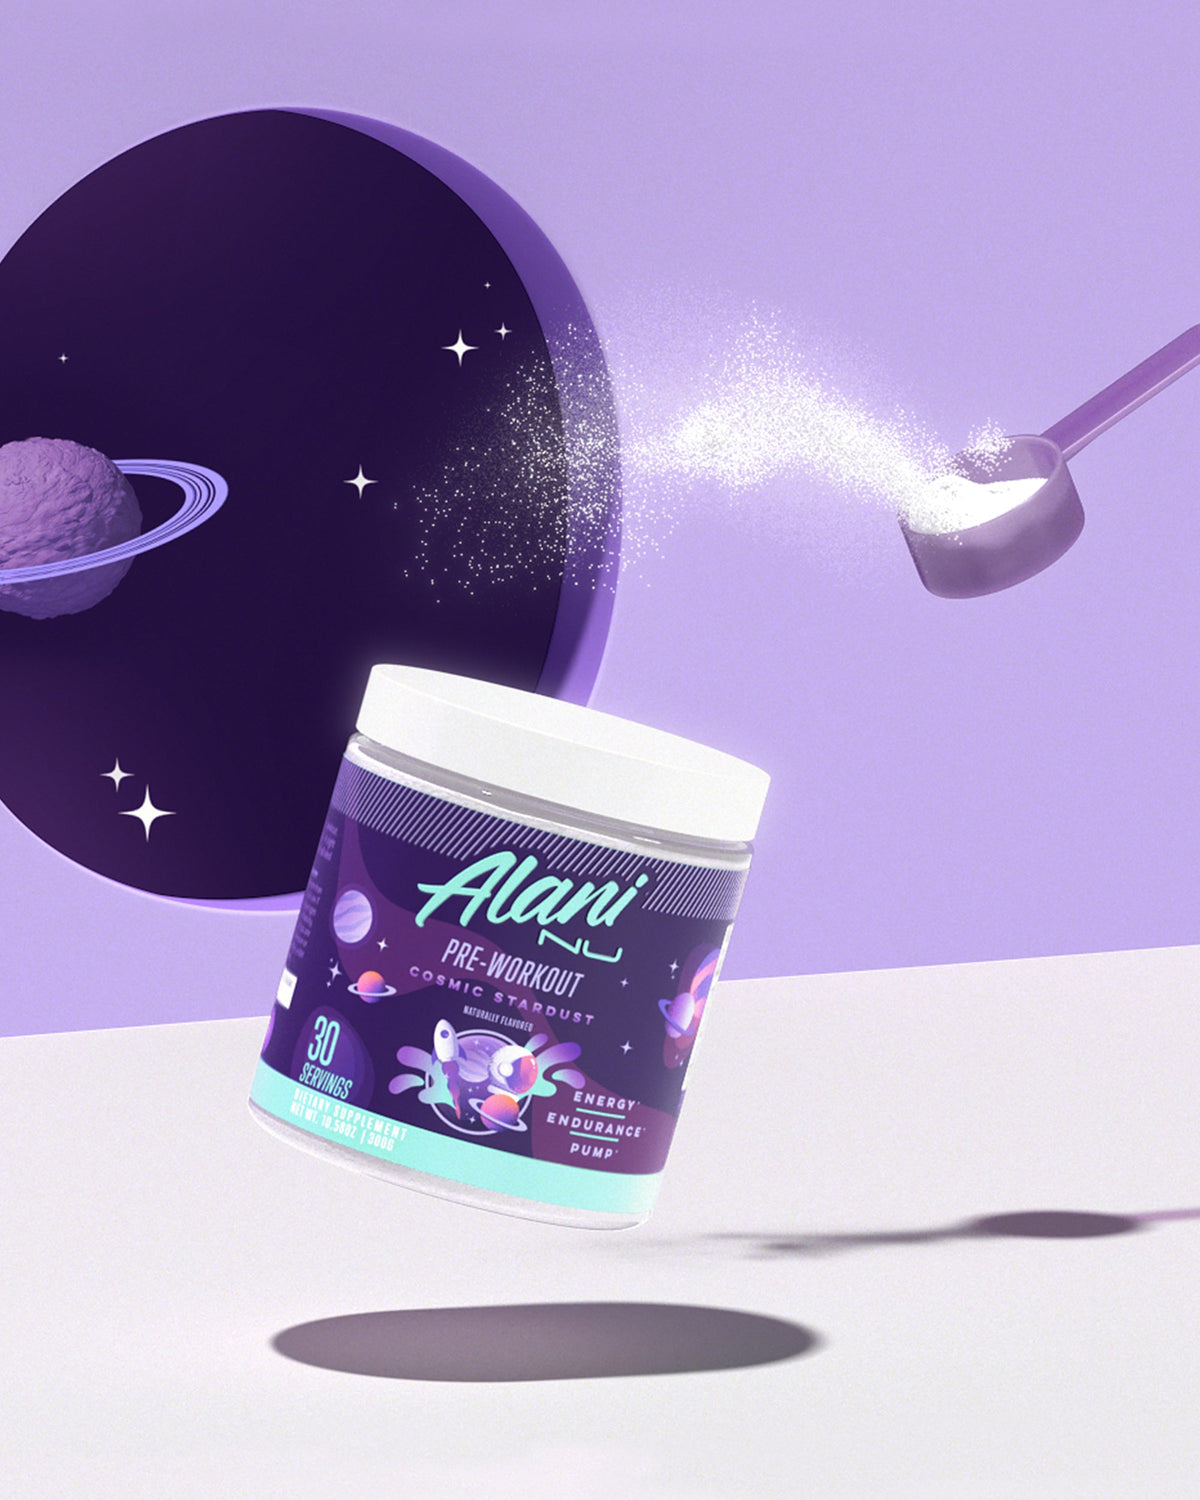 A container of Pre-workout in Cosmic Stardust flavor next to a spoon full of pre-workout powder.